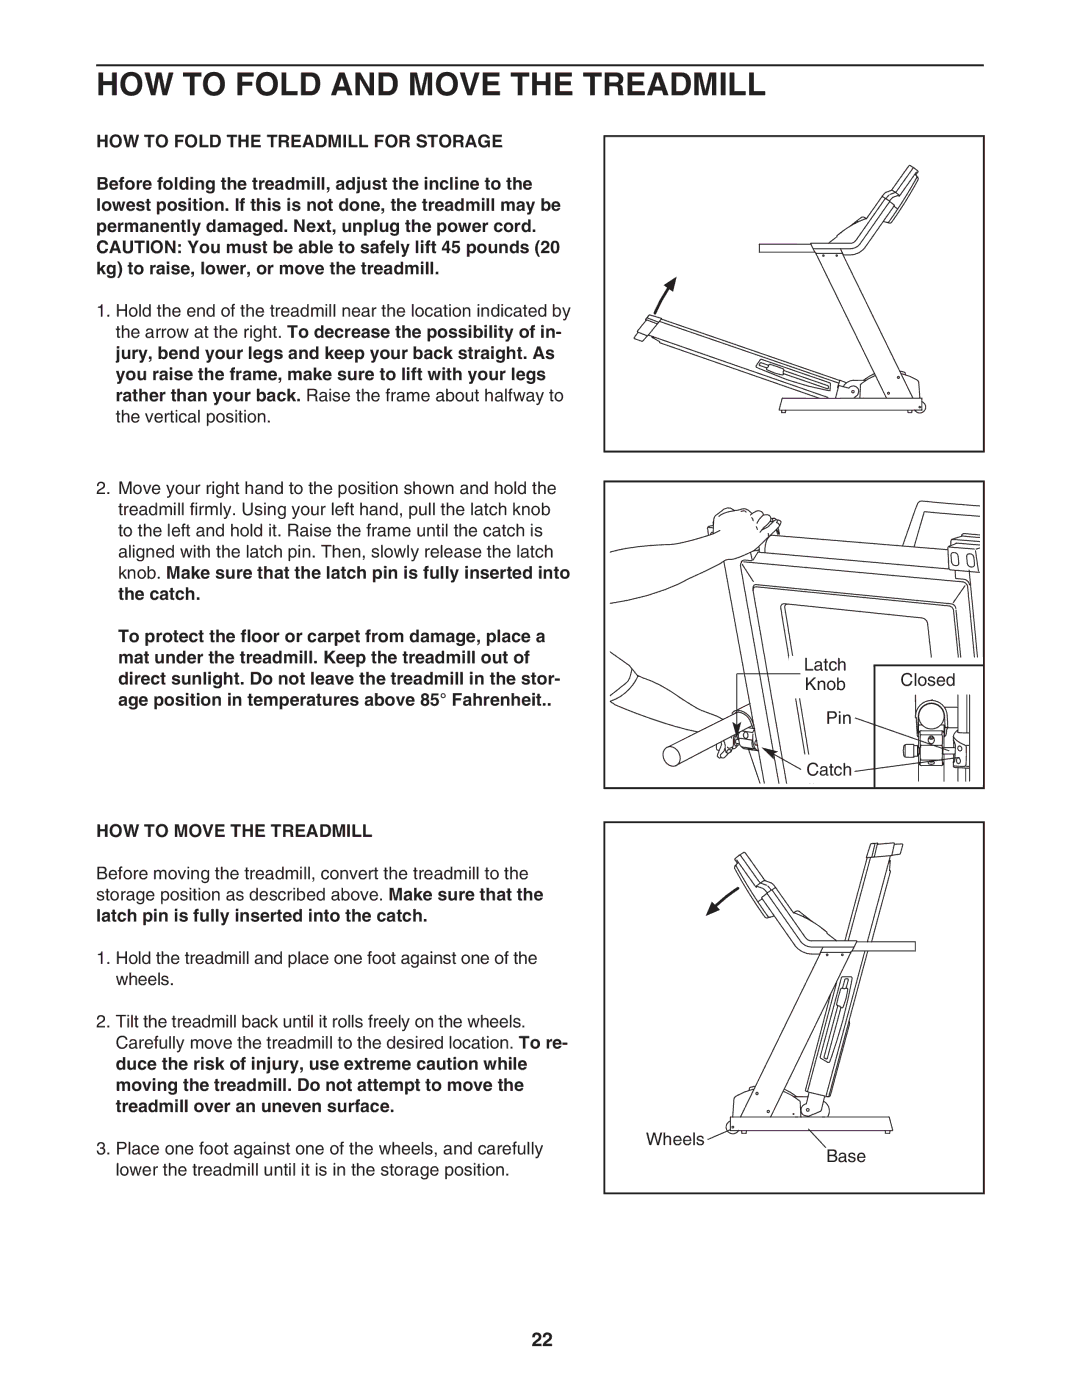 Reebok Fitness RBTL19605.0 manual HOW to Fold and Move the Treadmill, HOW to Fold the Treadmill for Storage 